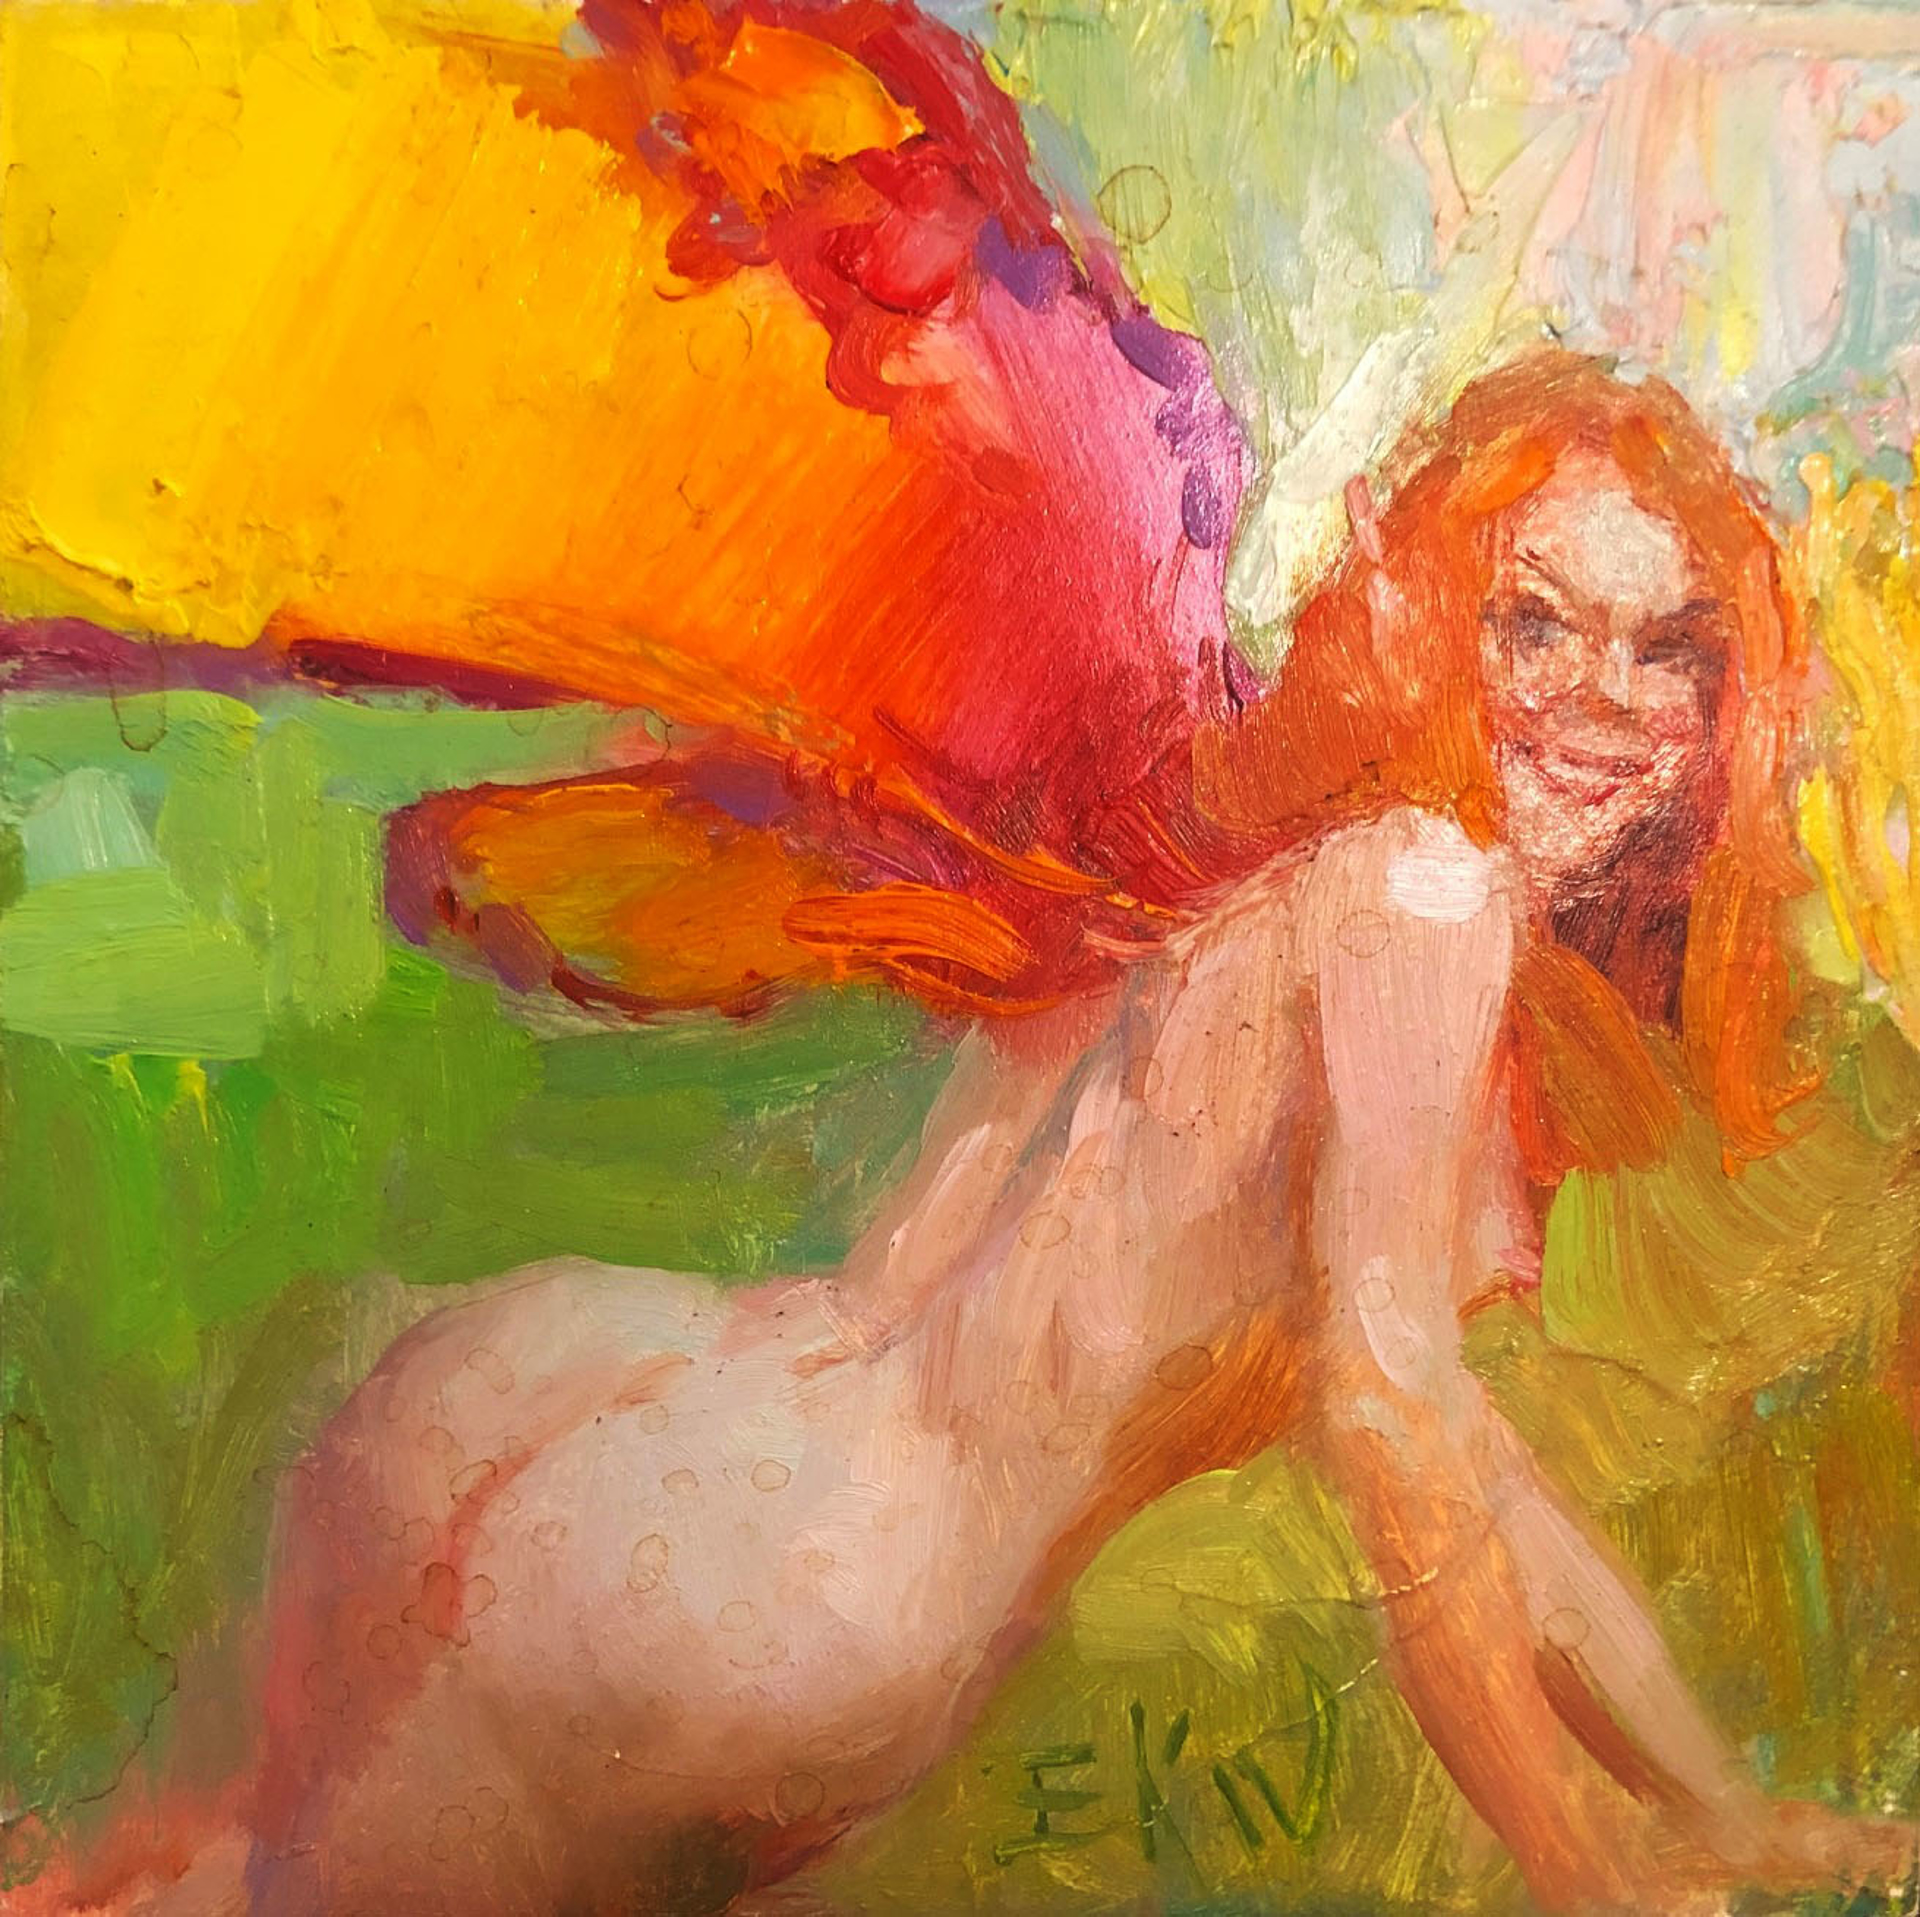 Red Winged Pixie by Eric Wallis